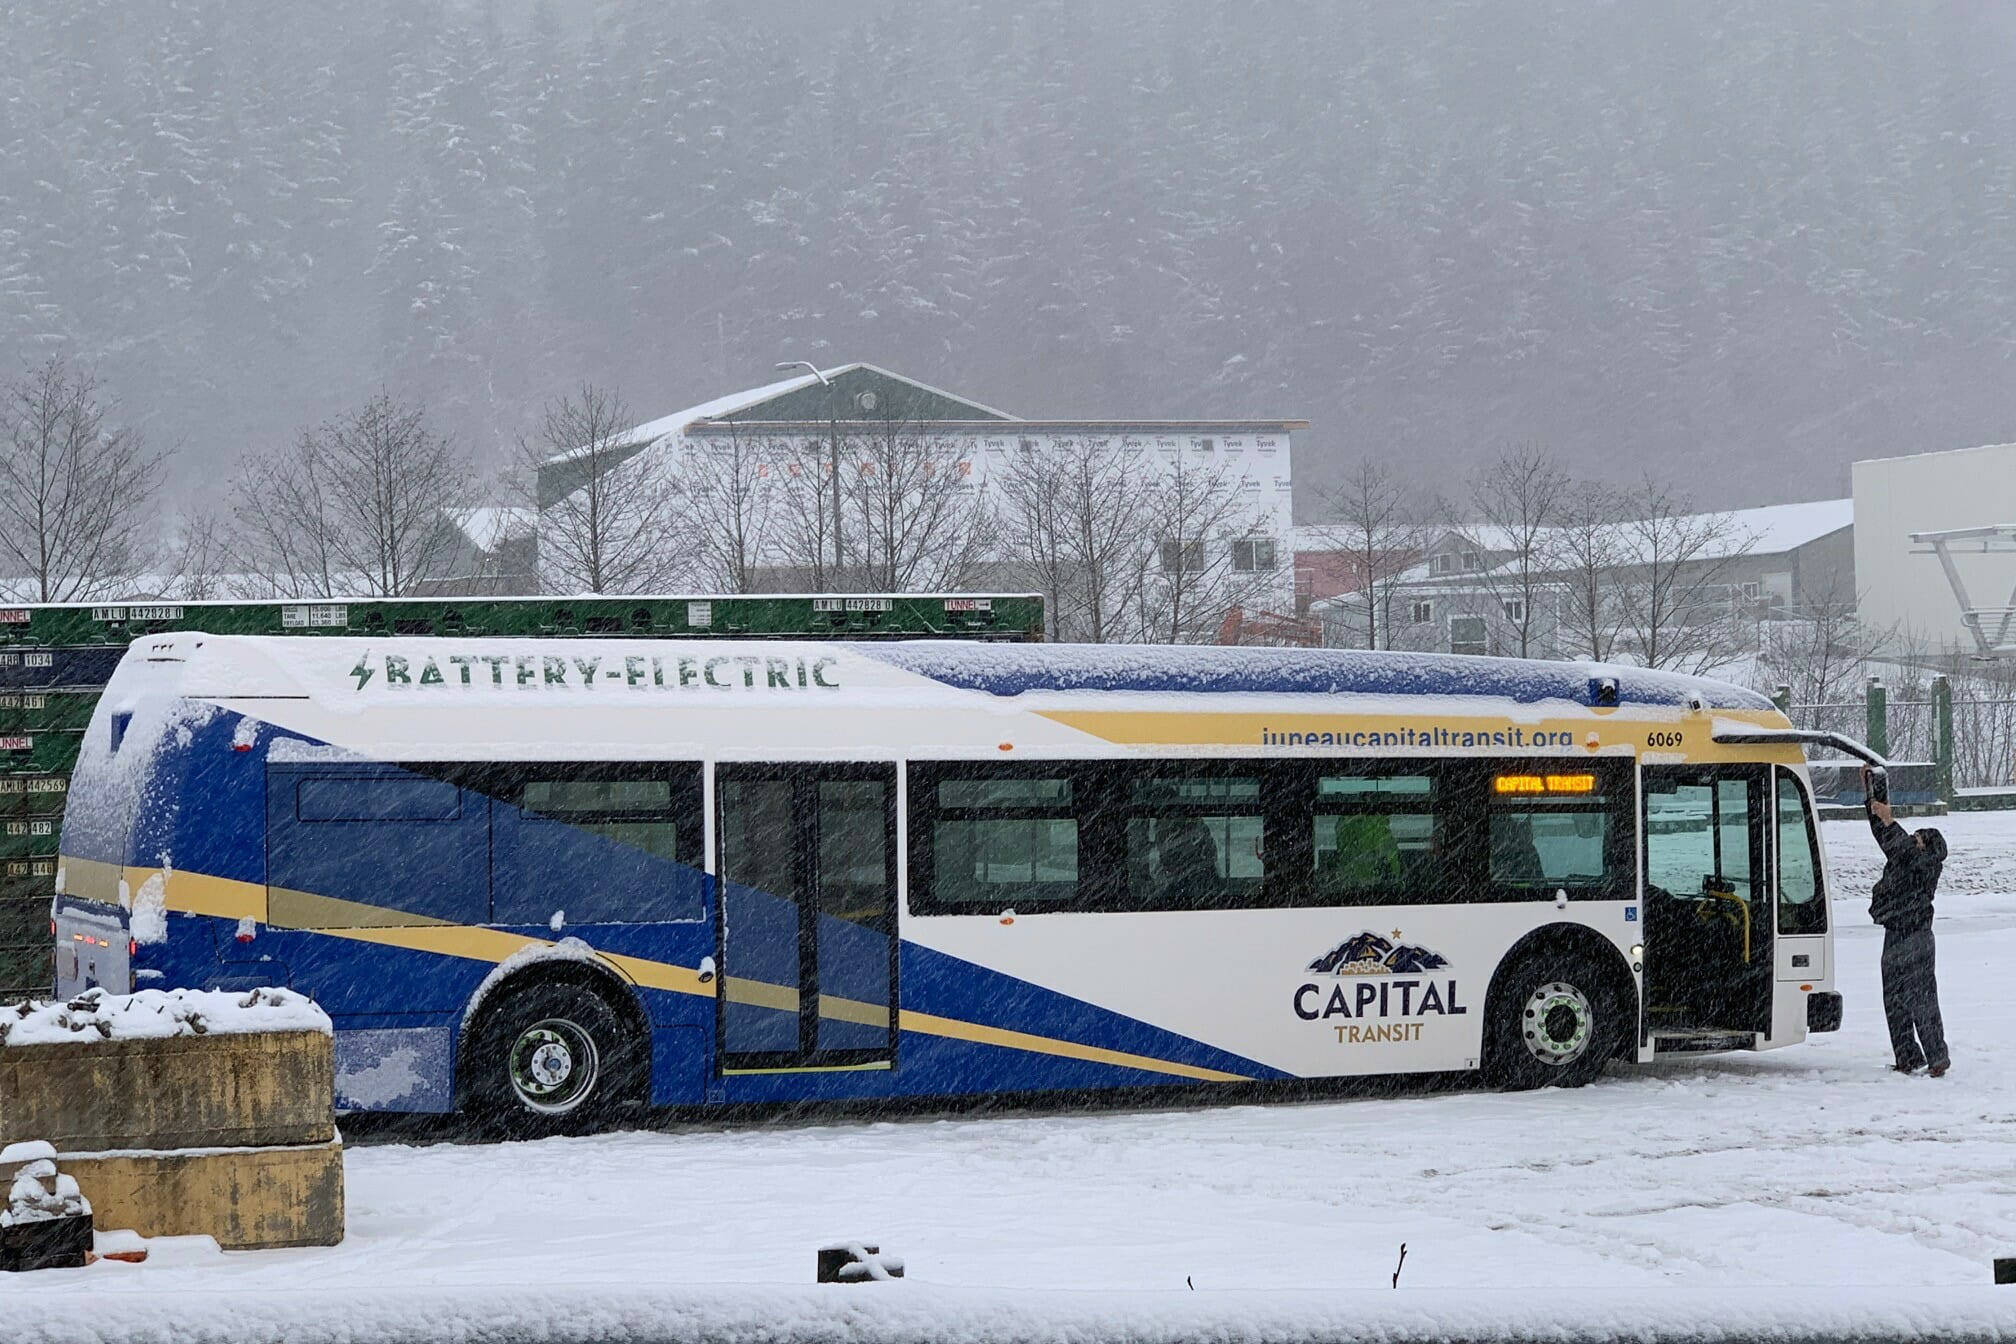 Capital Transit received its first electric bus, seen here, on Dec. 16, 2020. The bus will enter active service in February. (Courtesy photo / City and Borough of Juneau)